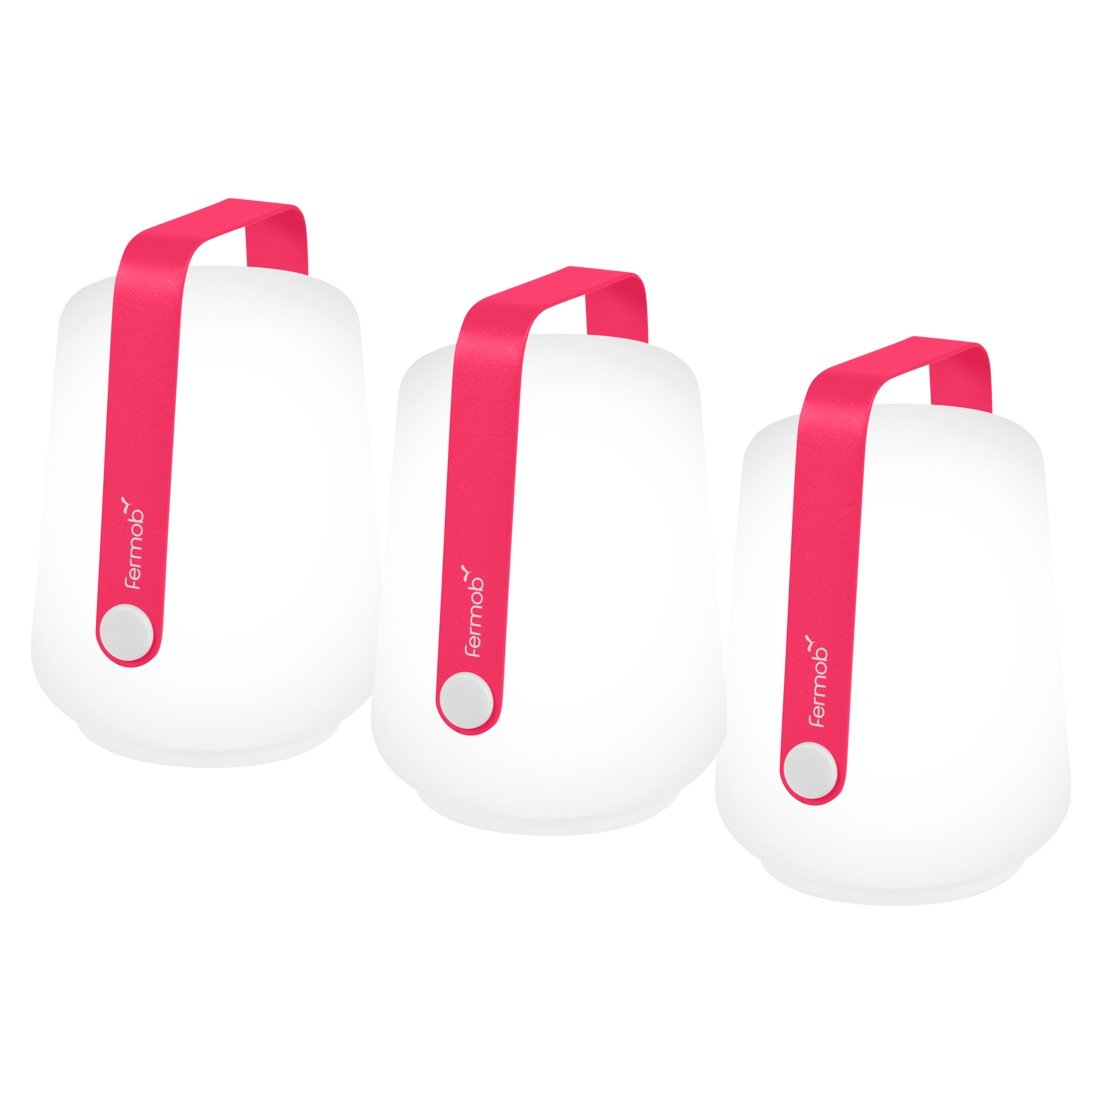 3 Fermob lanterns in Pink Praline on a White background. The lanterns have the Fermob logo on their metal handles.